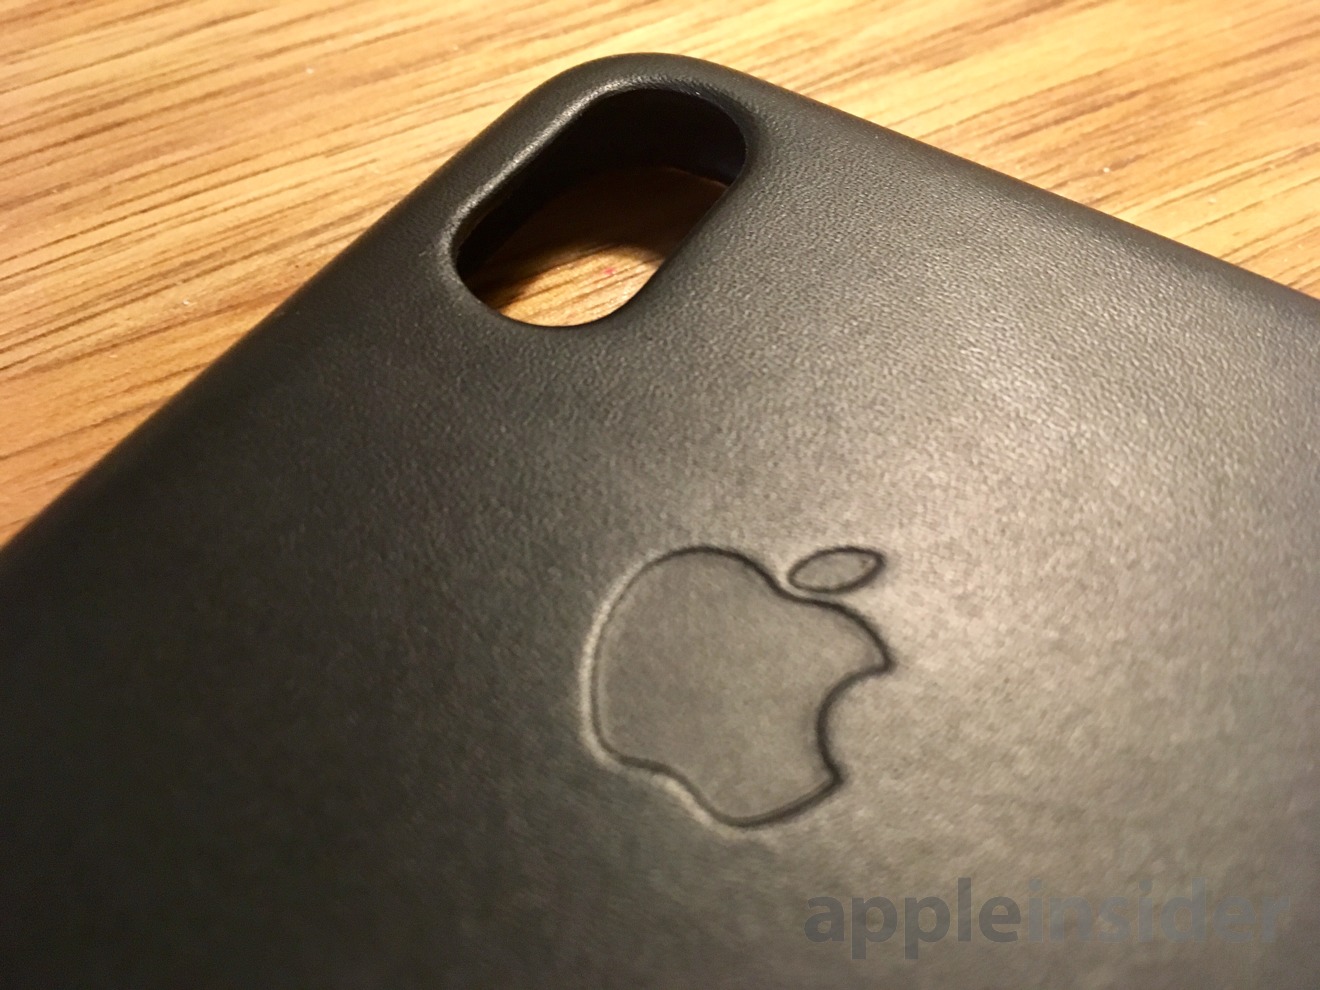 Artificial Refurbishment embroidery First look: Apple's official iPhone X leather and silicone cases |  AppleInsider